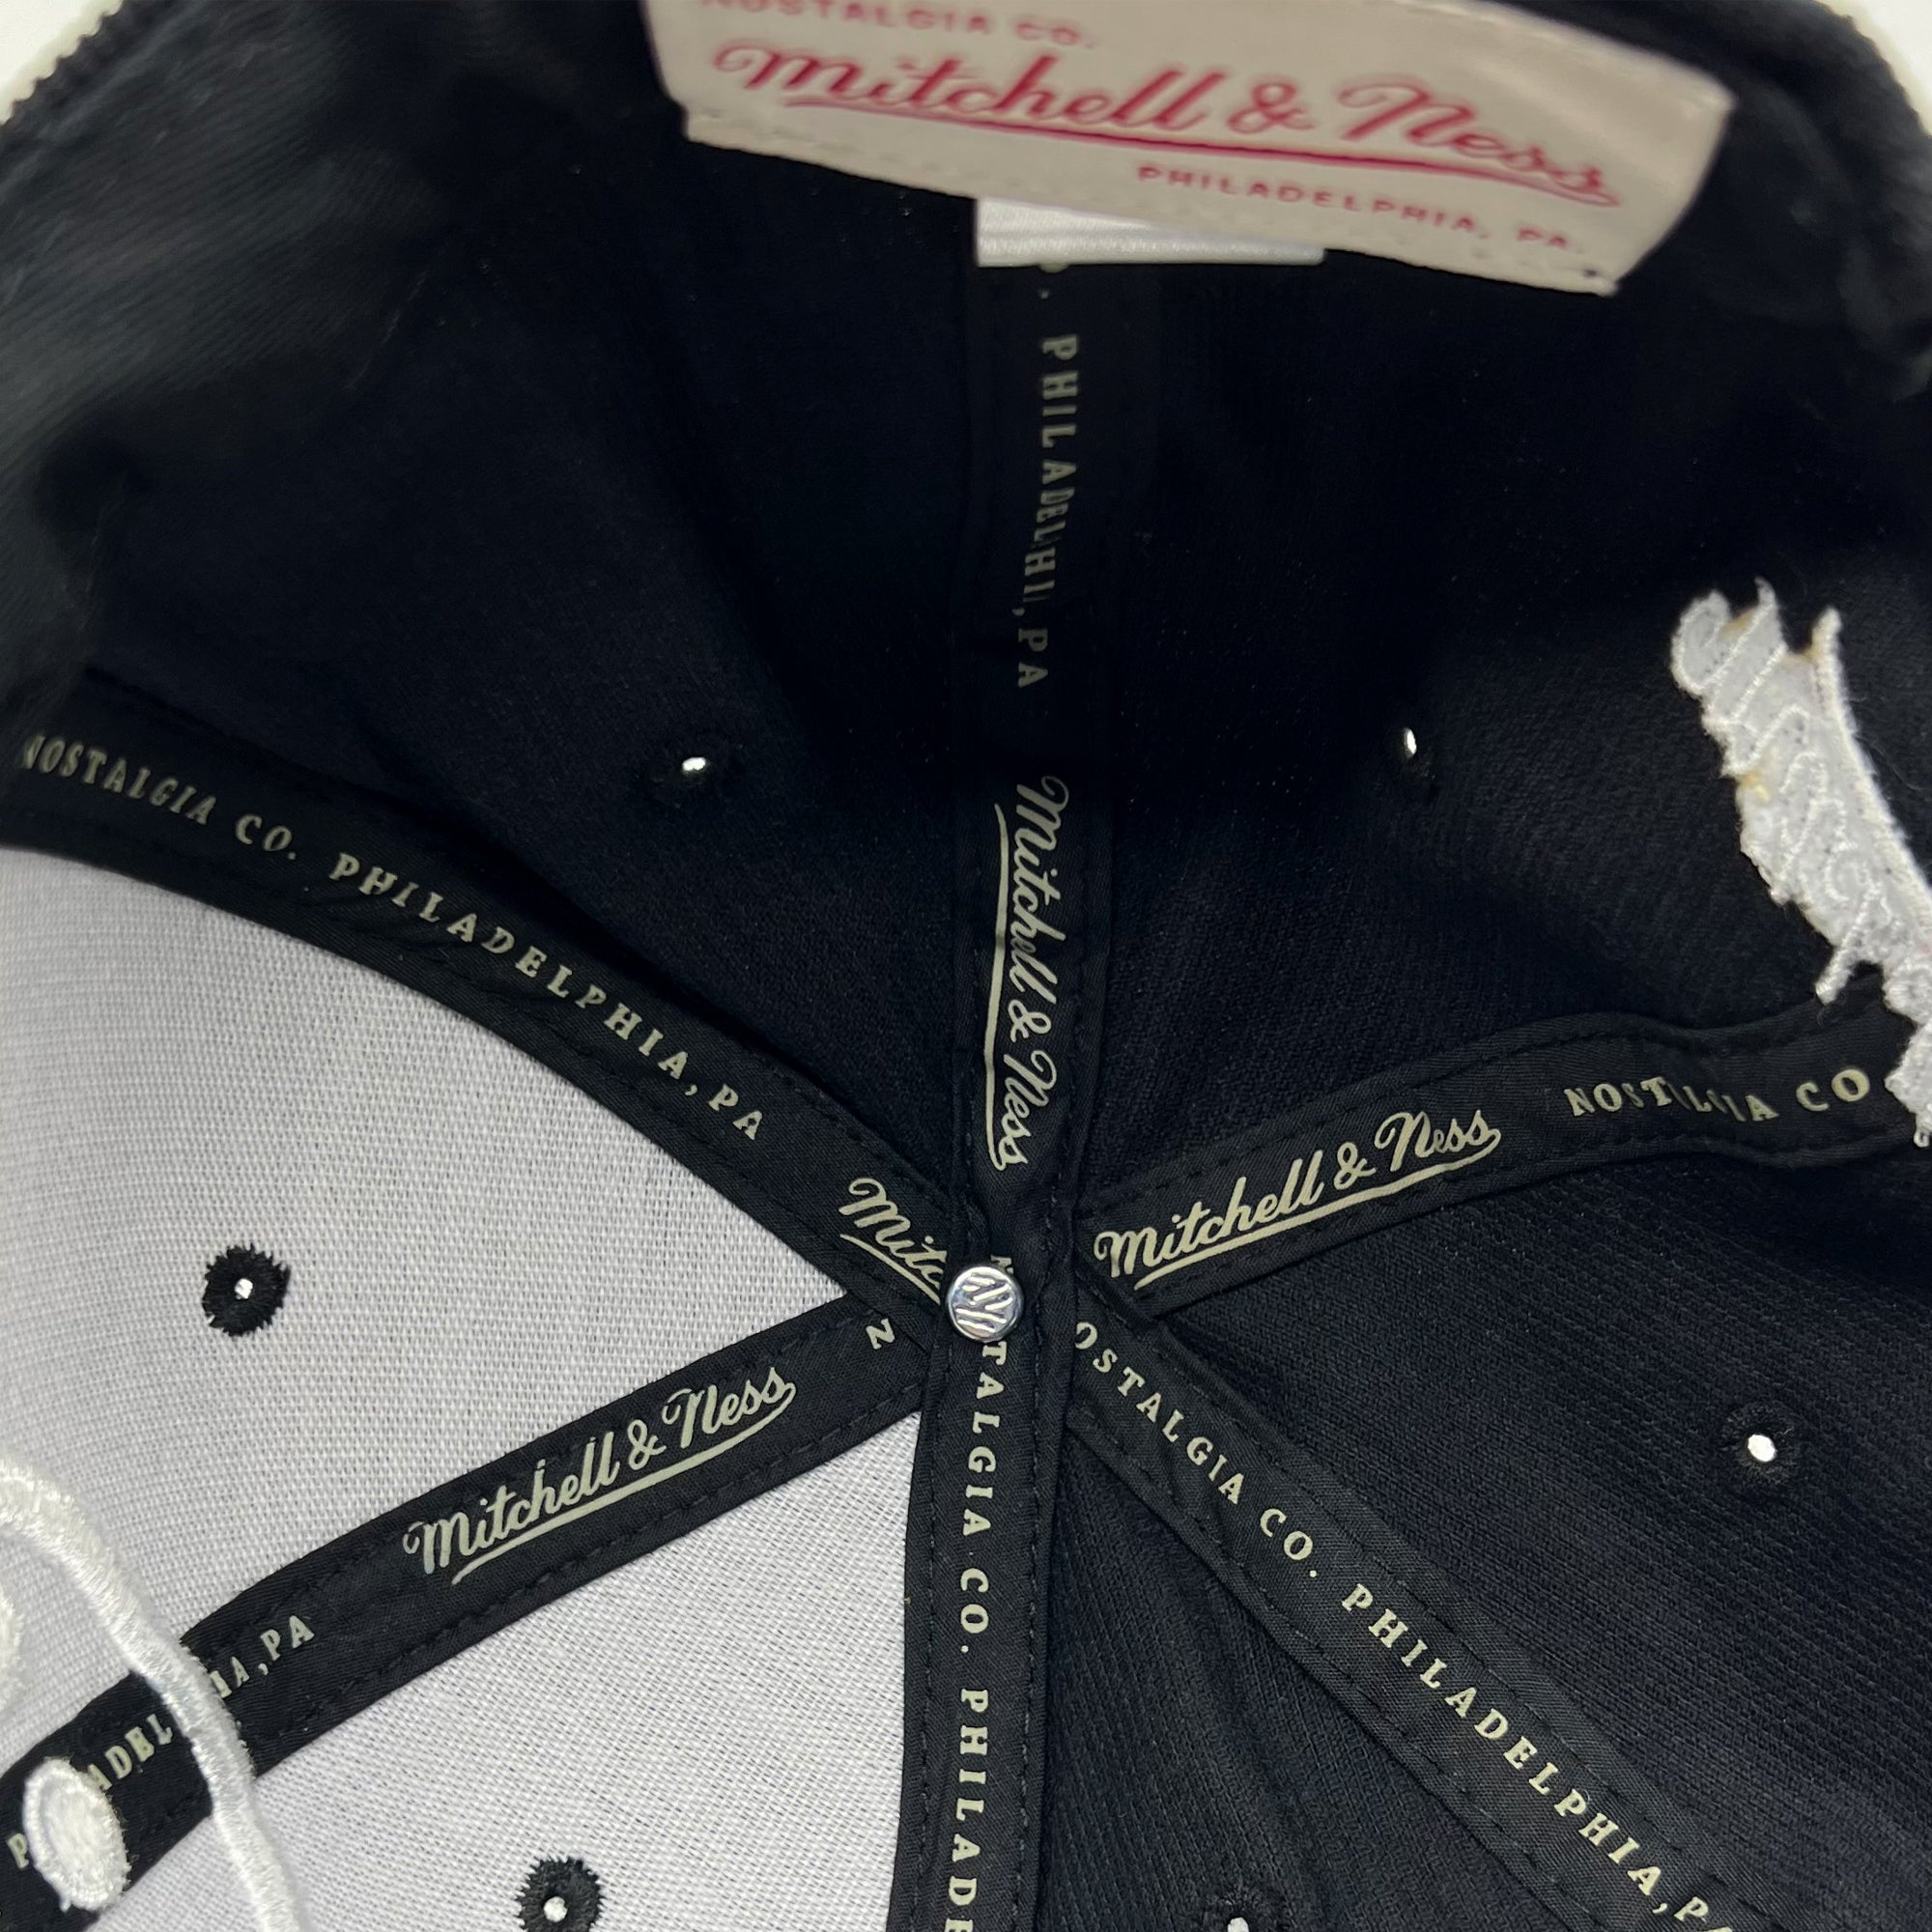 Detailed close up of Mitchell & Ness taping inside the crown of black cap.